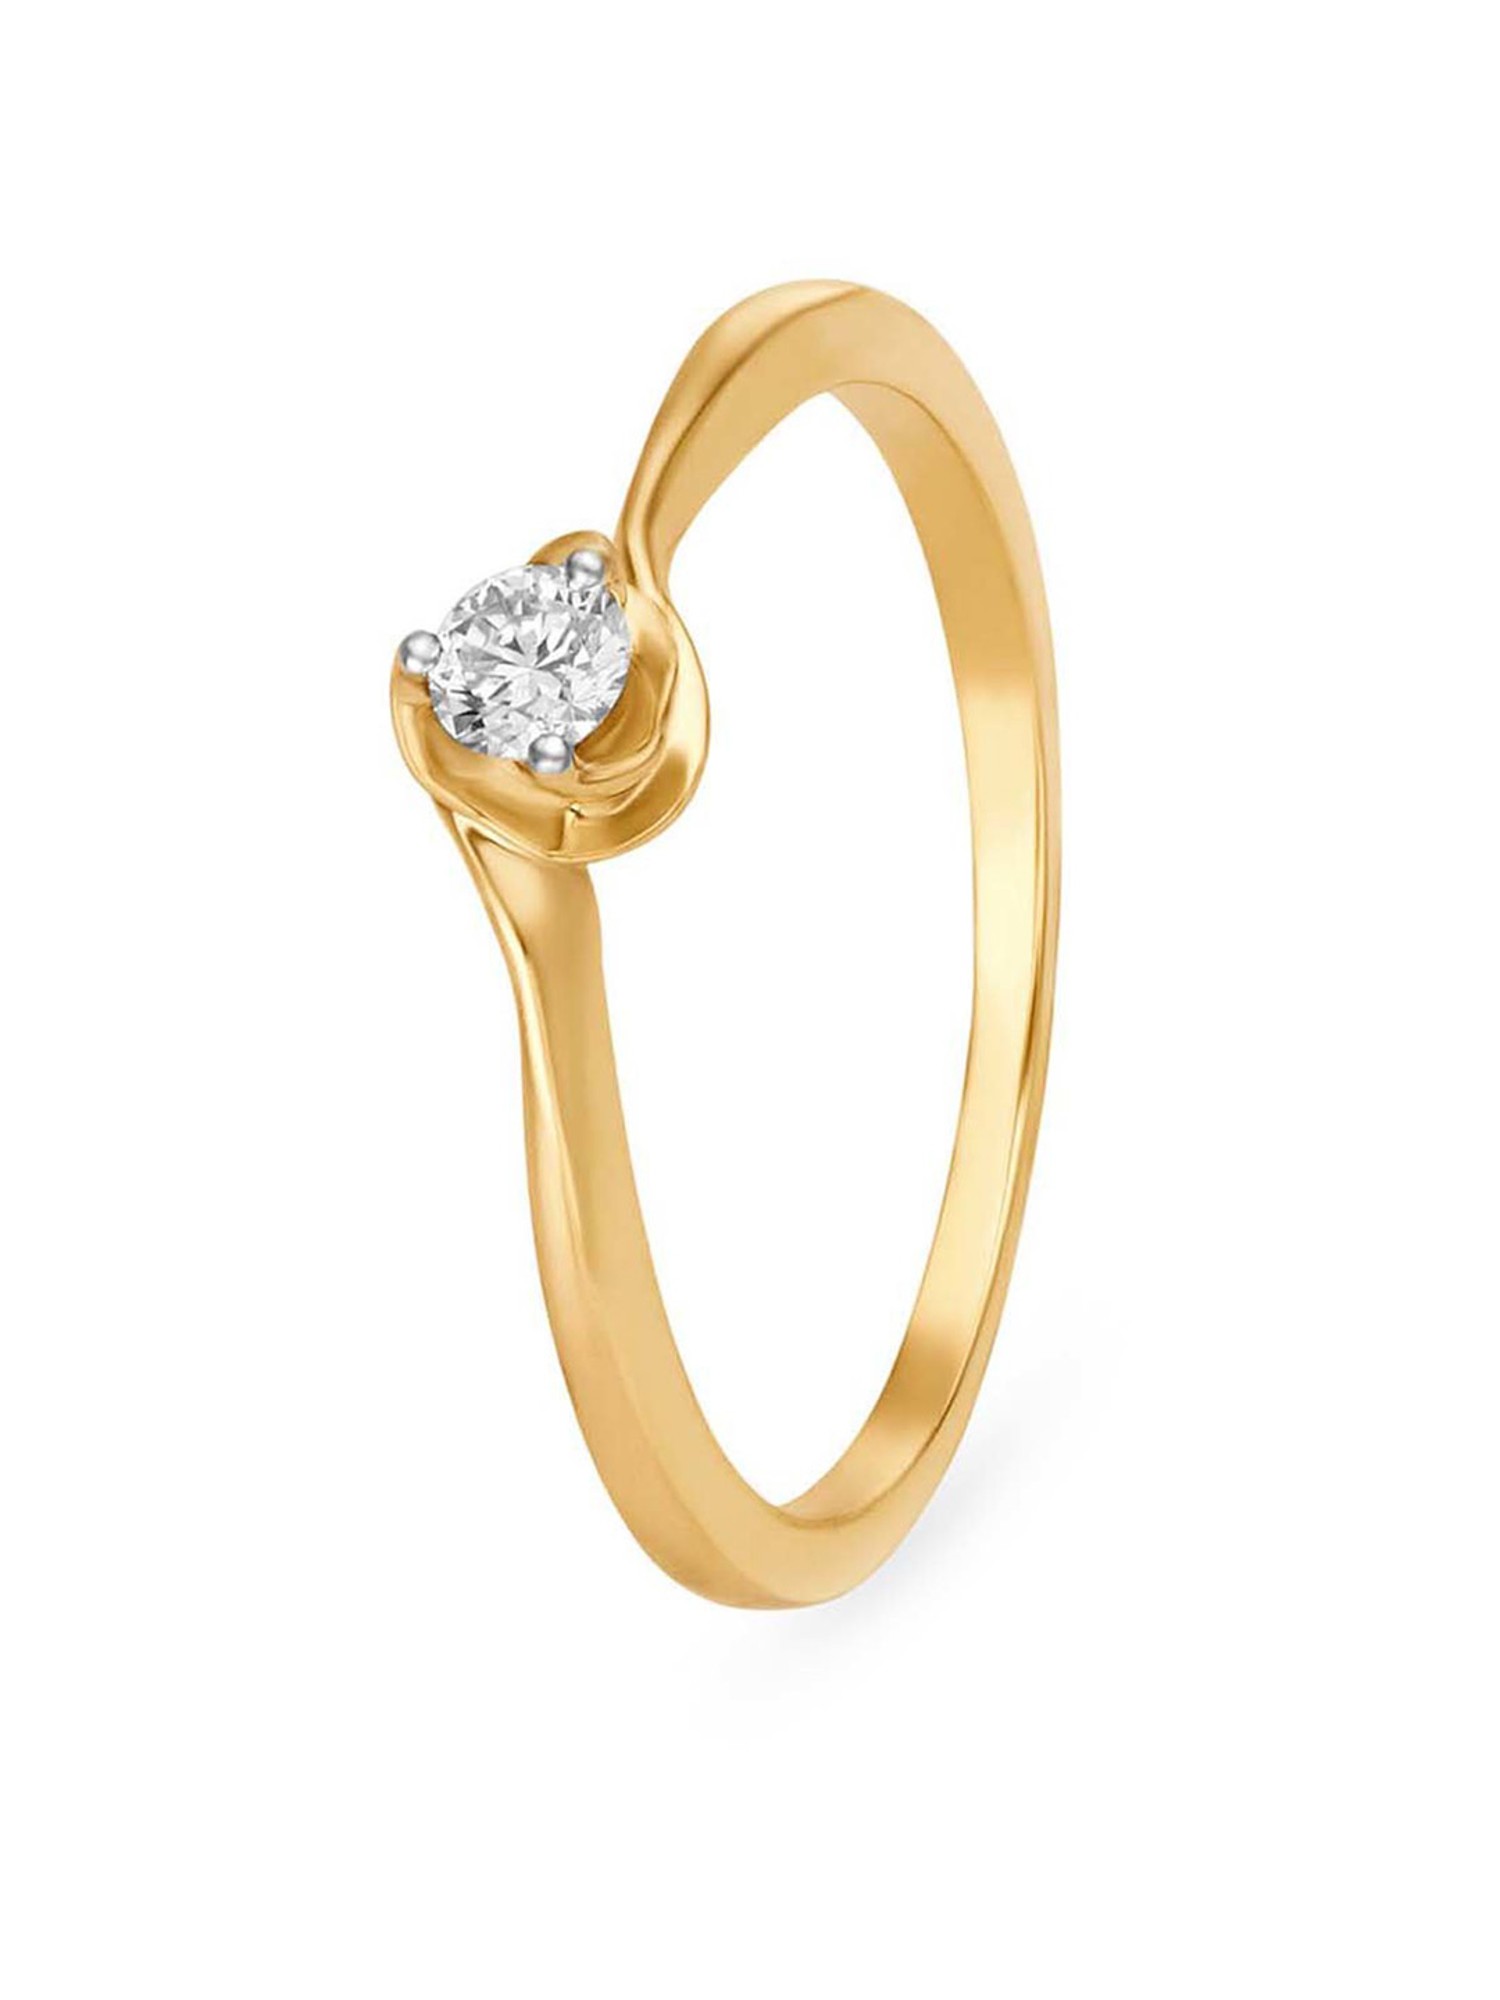 Tanishq 22KT Gold Finger Ring, Size: 18.80 Mm at Rs 8874/piece in Jaipur |  ID: 20985375730